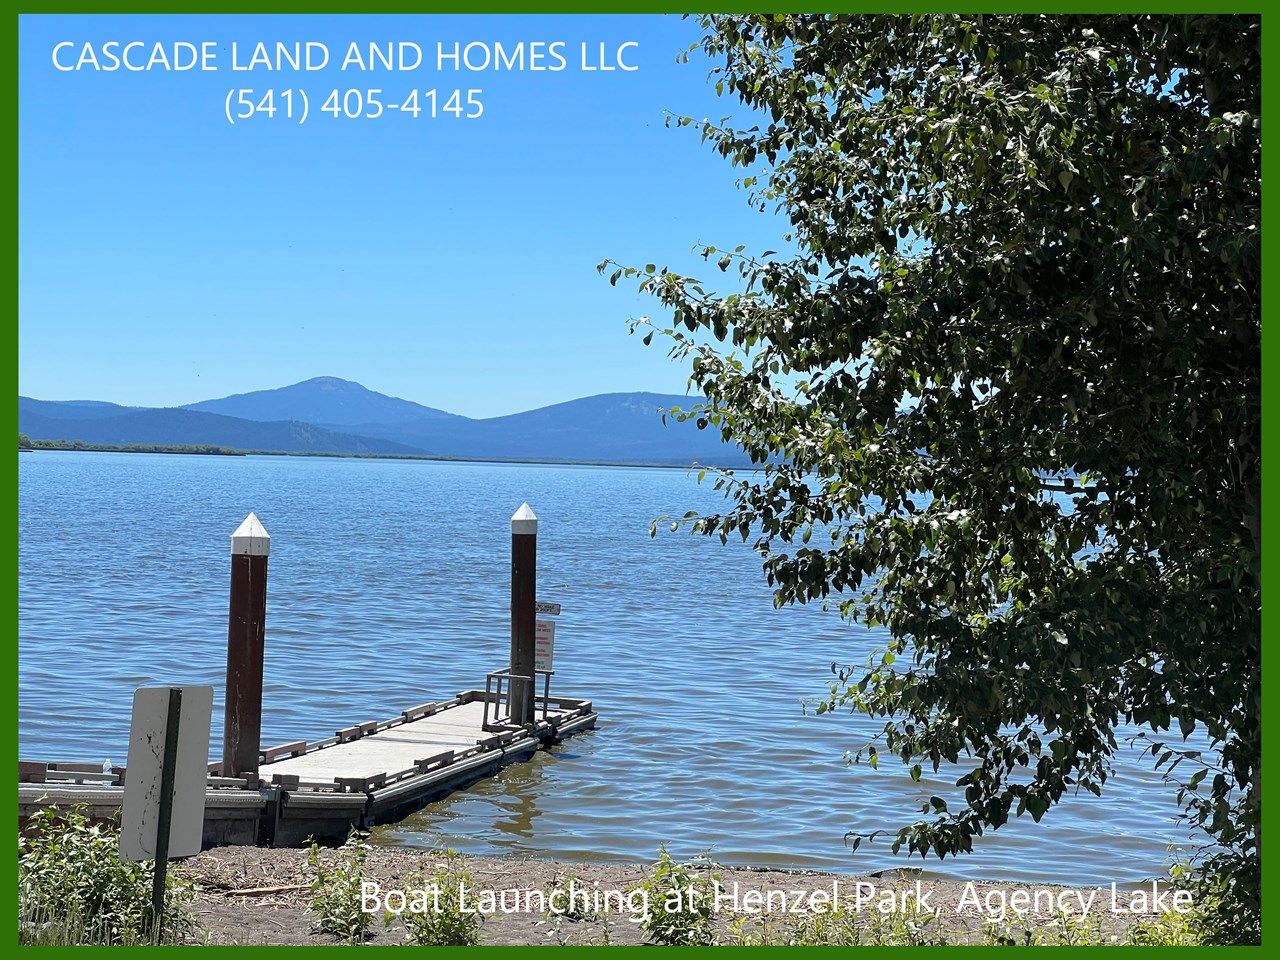 agency lake is about 6 miles away. this boat launching dock is at the public, henzel park. the lake is actually the northernmost part of the upper klamath lake, which has the largest surface area of any lake in oregon.